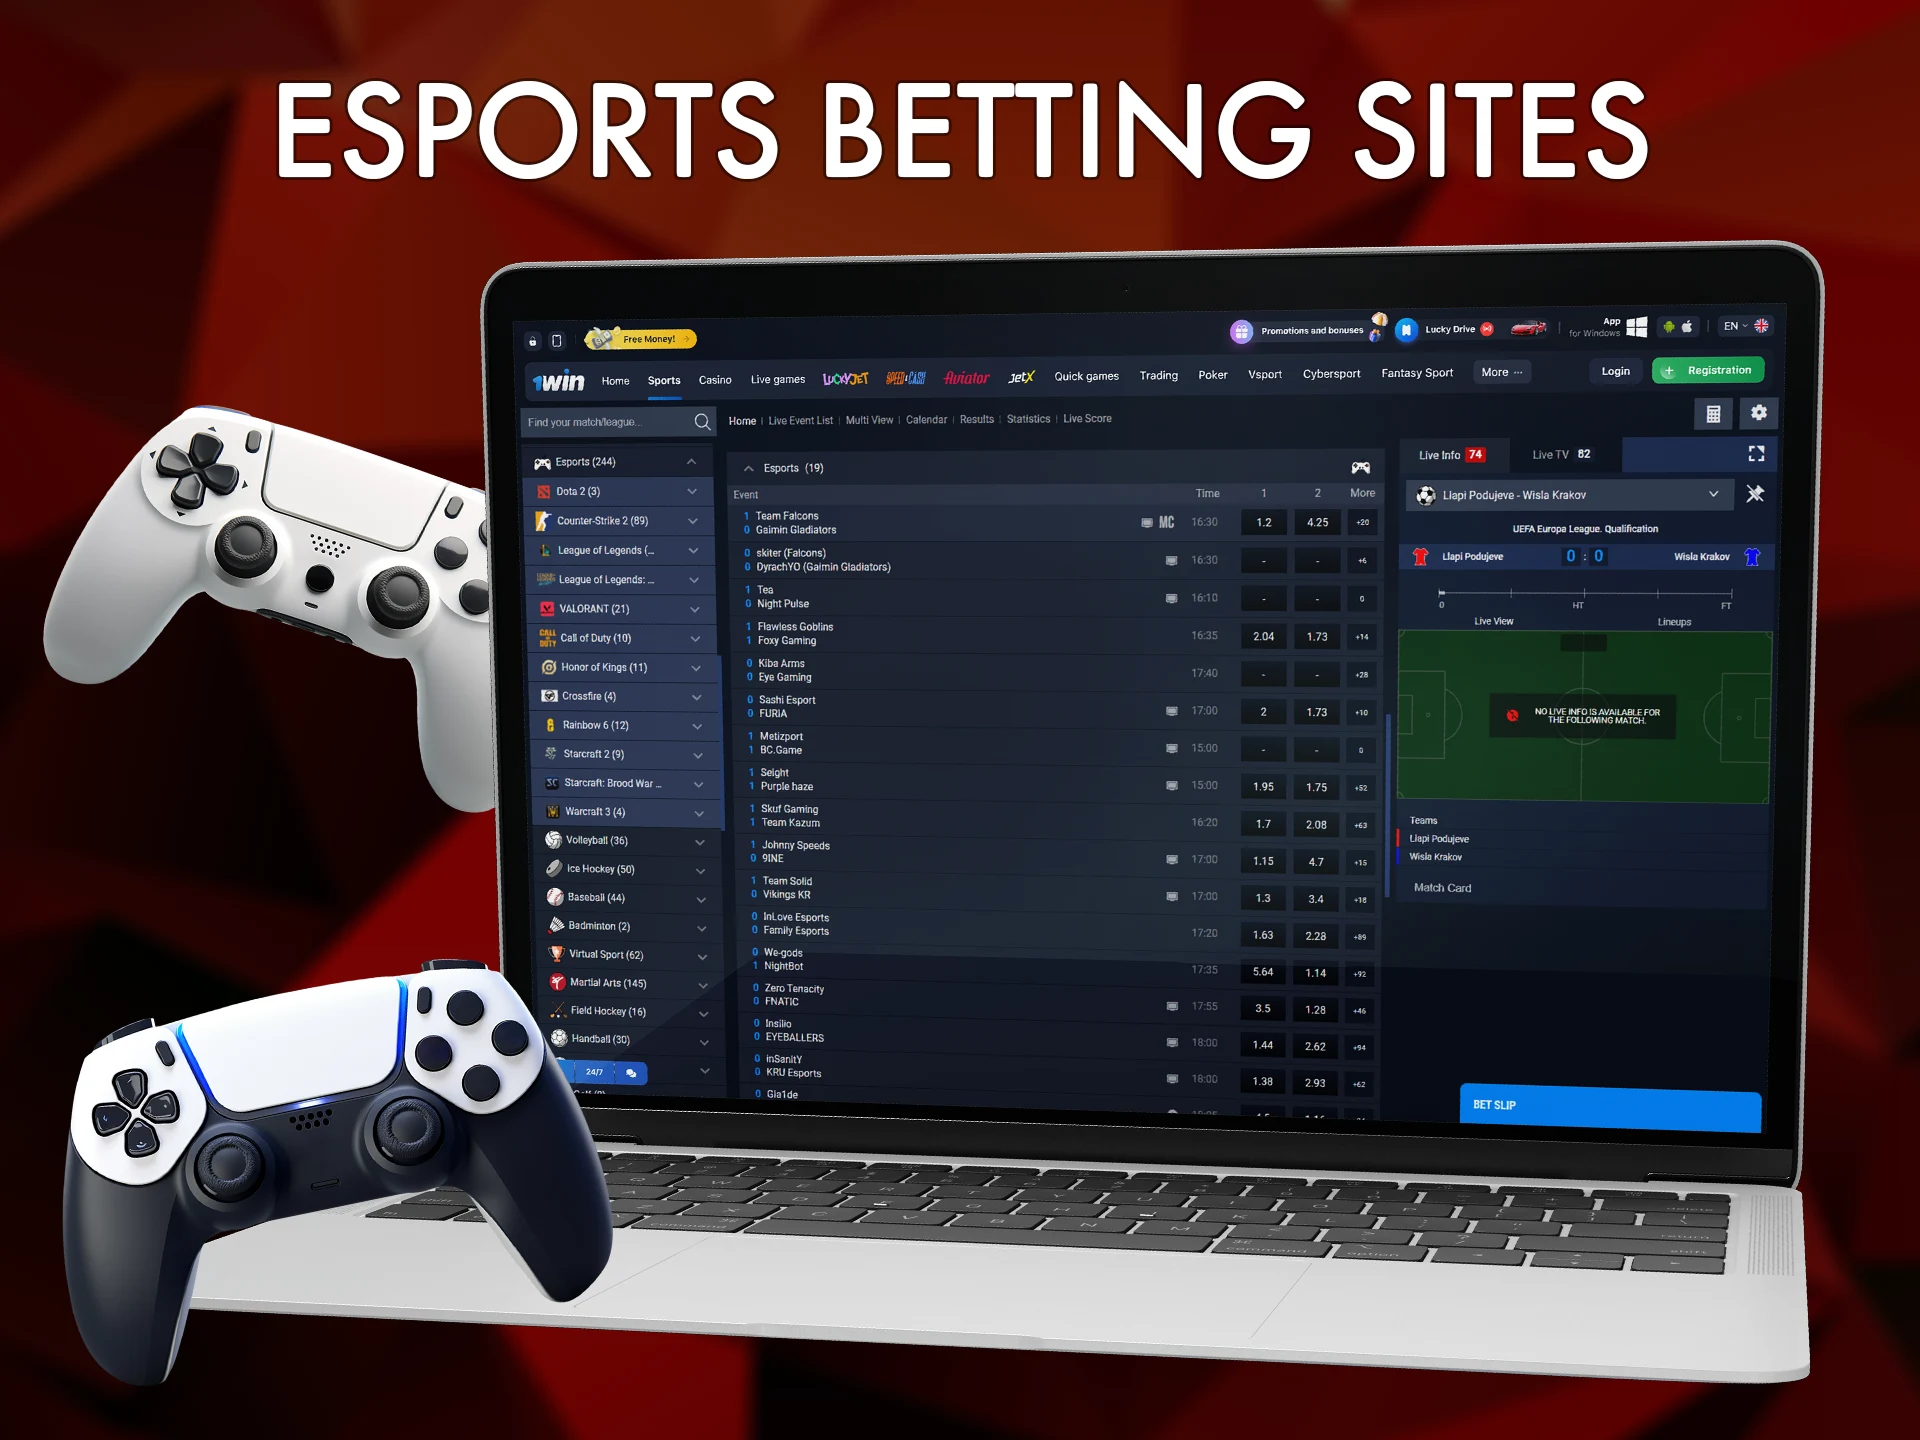 Find out which sites offer esports betting.